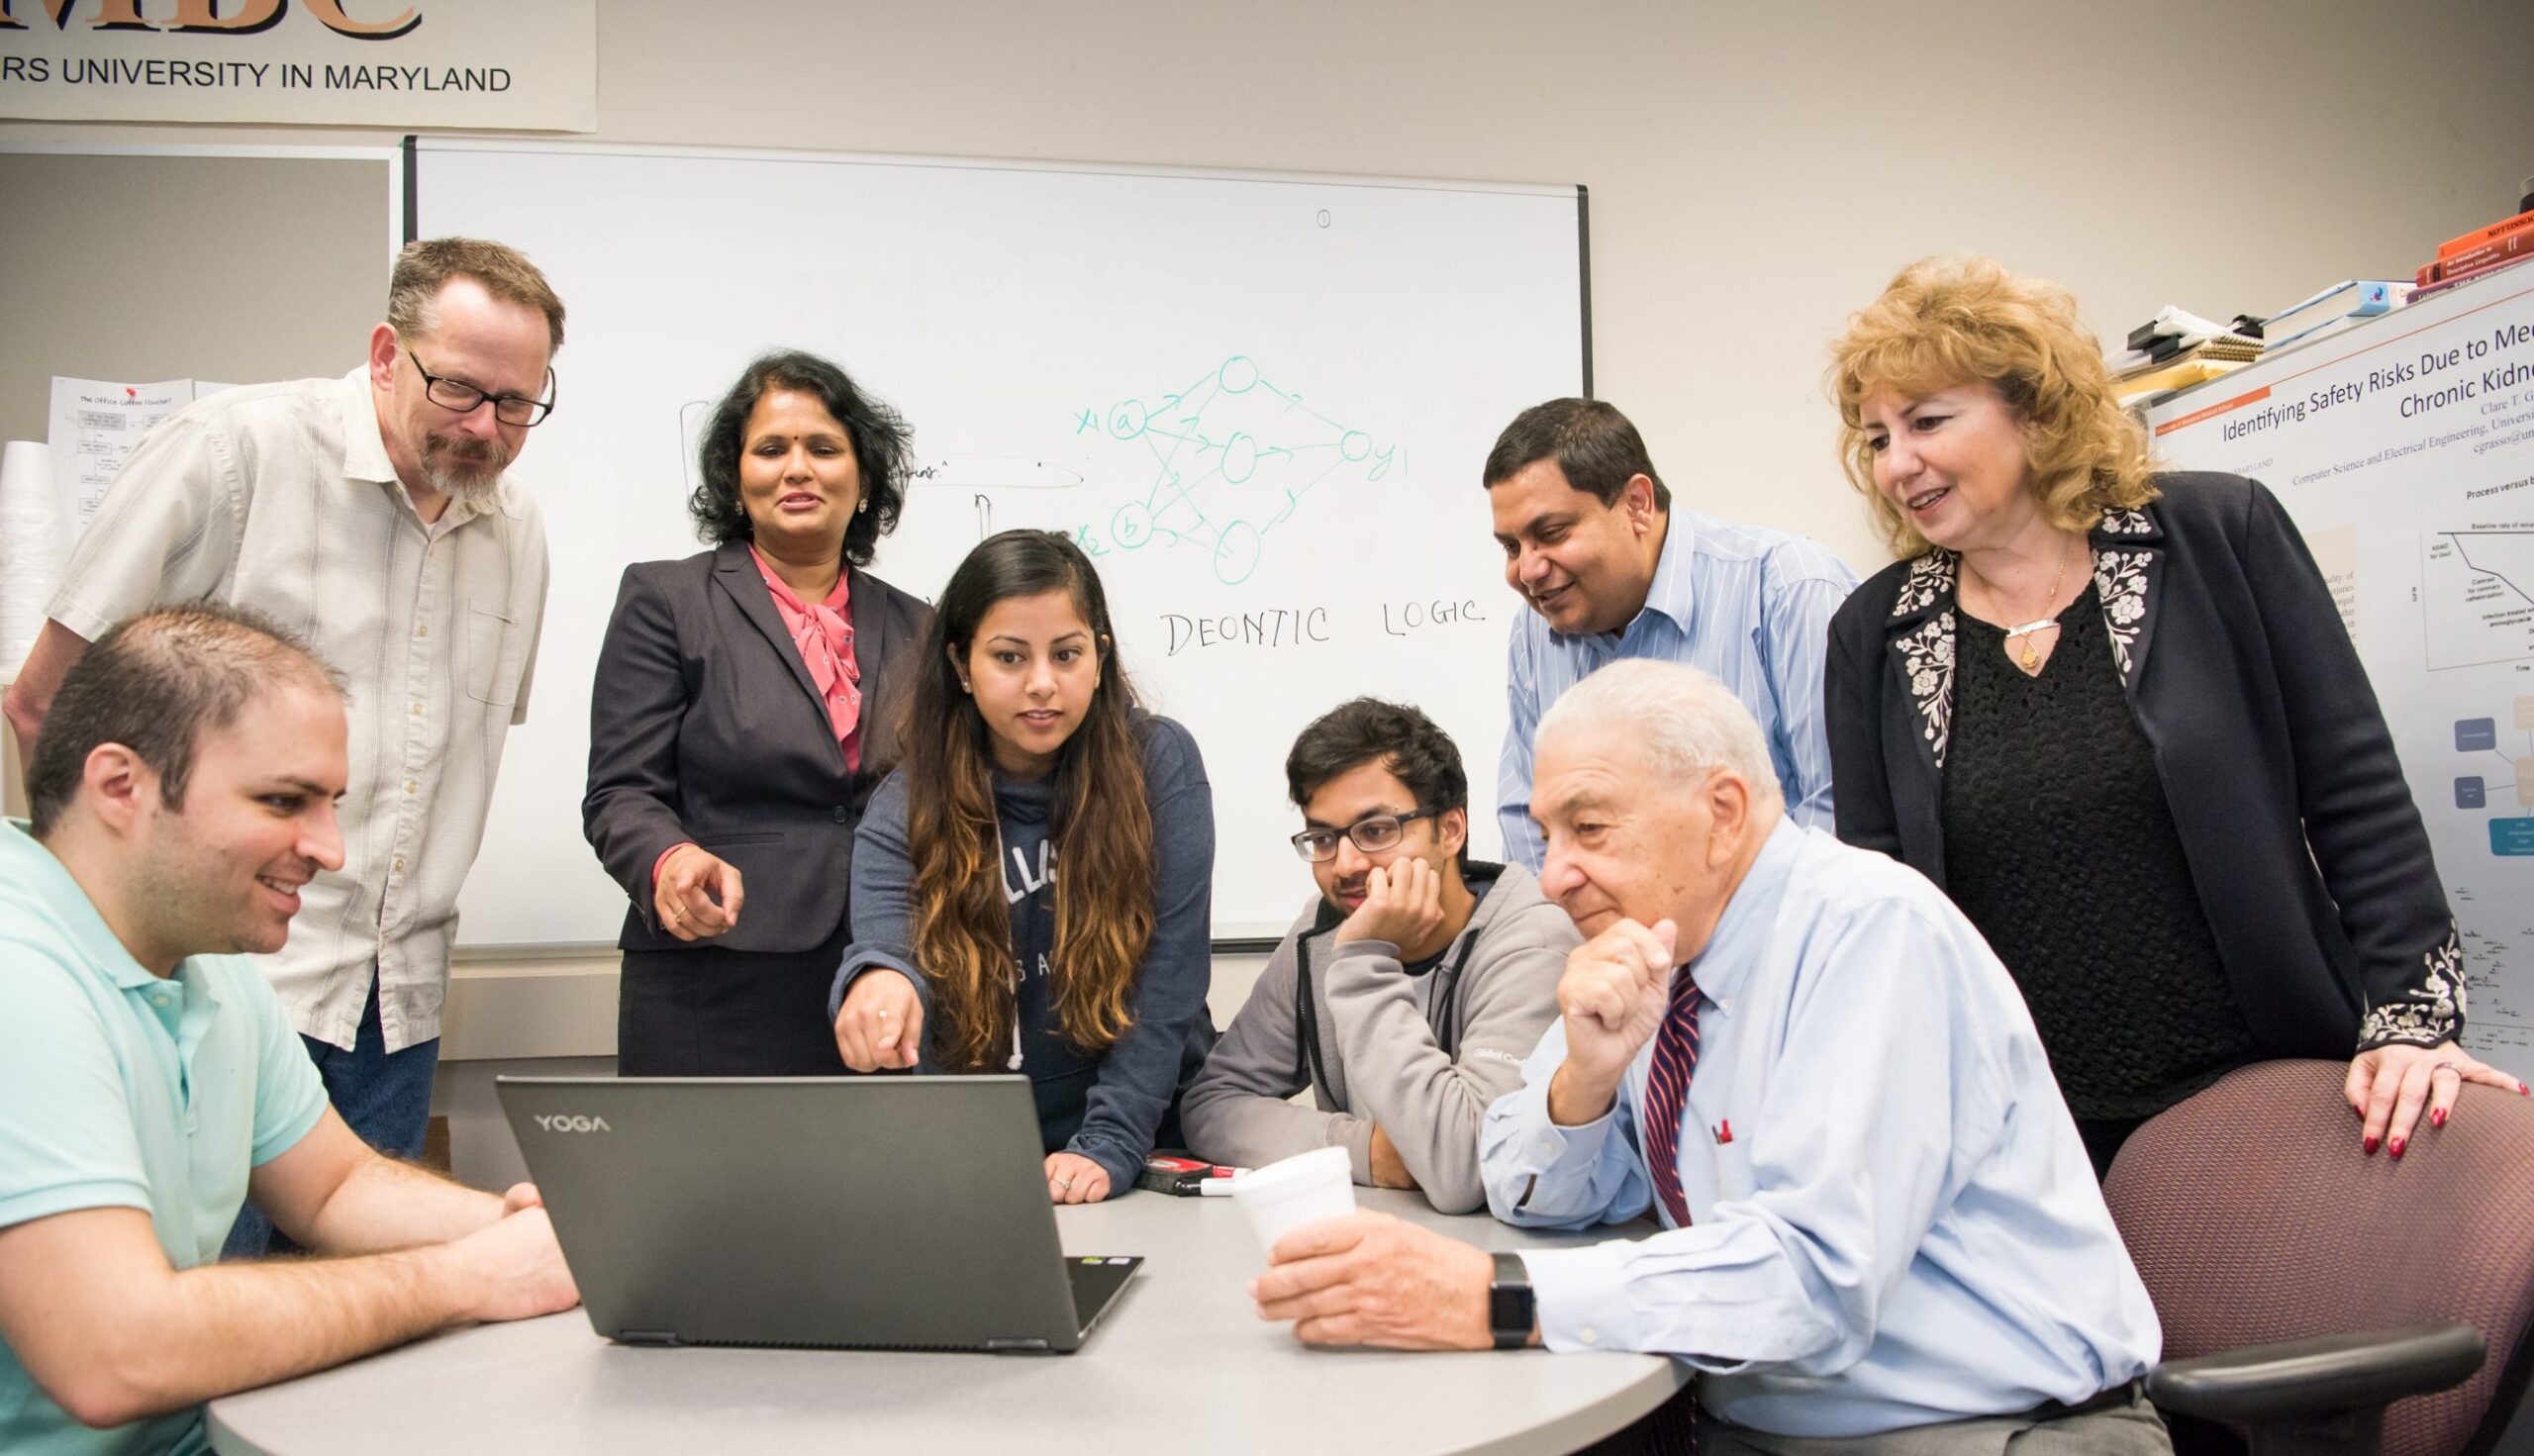 A diverse group of students and professors clusters around a laptop screen in a conference room.